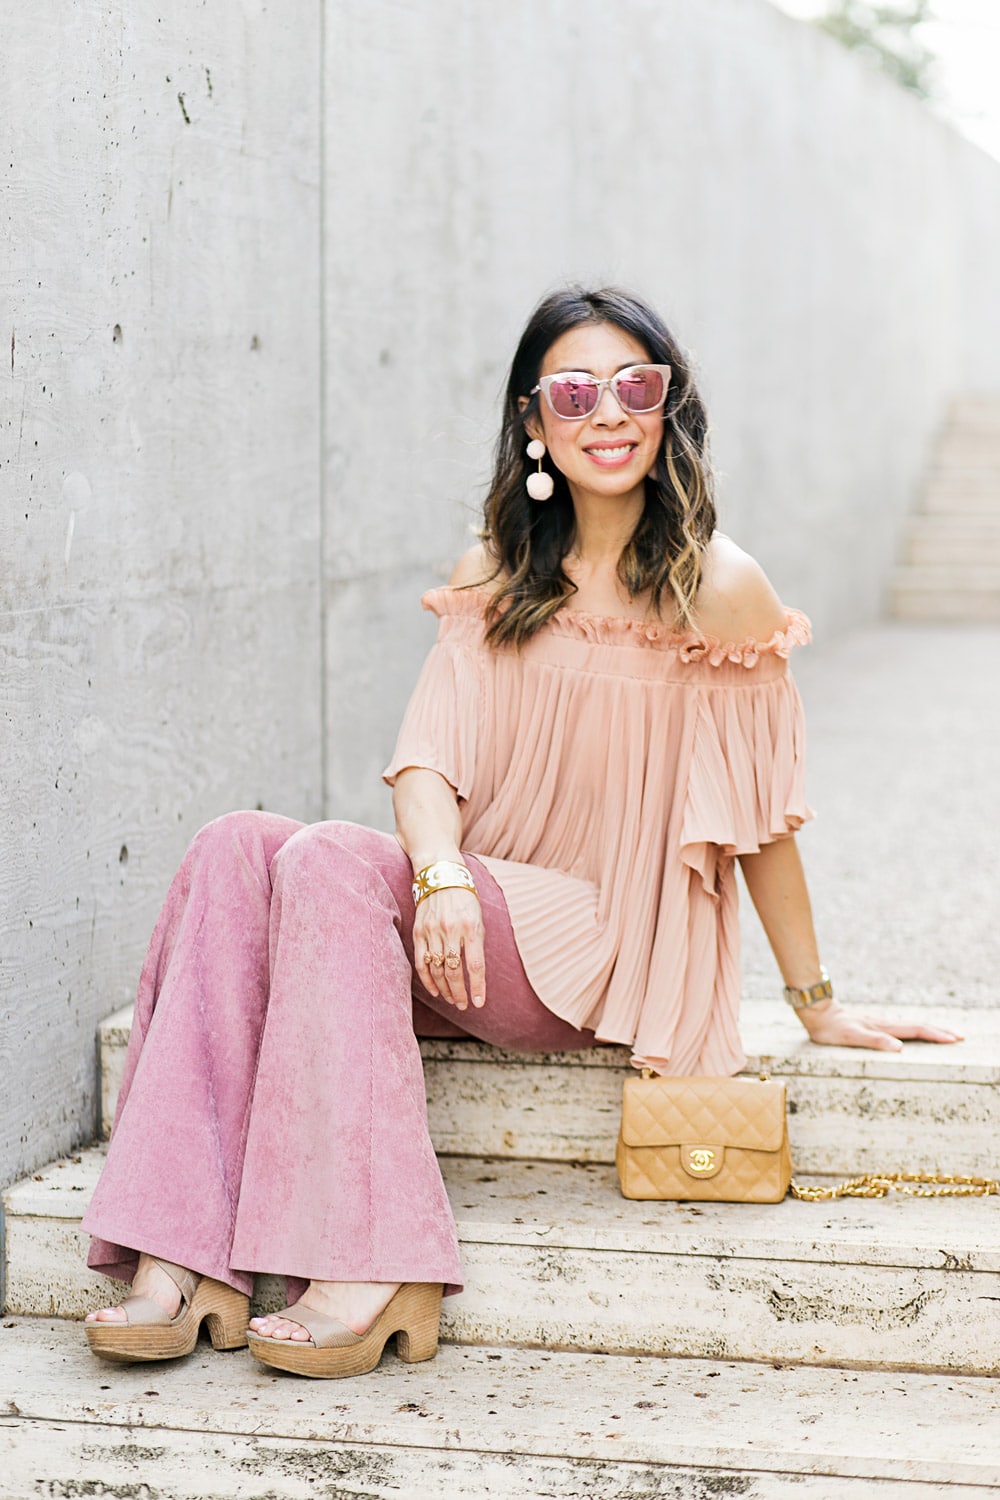 baublebar bahama pink pom pm earrings with endless rose pink pleated off the shoulder top and pink flare corduroy pants, chanel caviar mini flap, dior diorama pink mirrored sunglasses, spring outfit idea